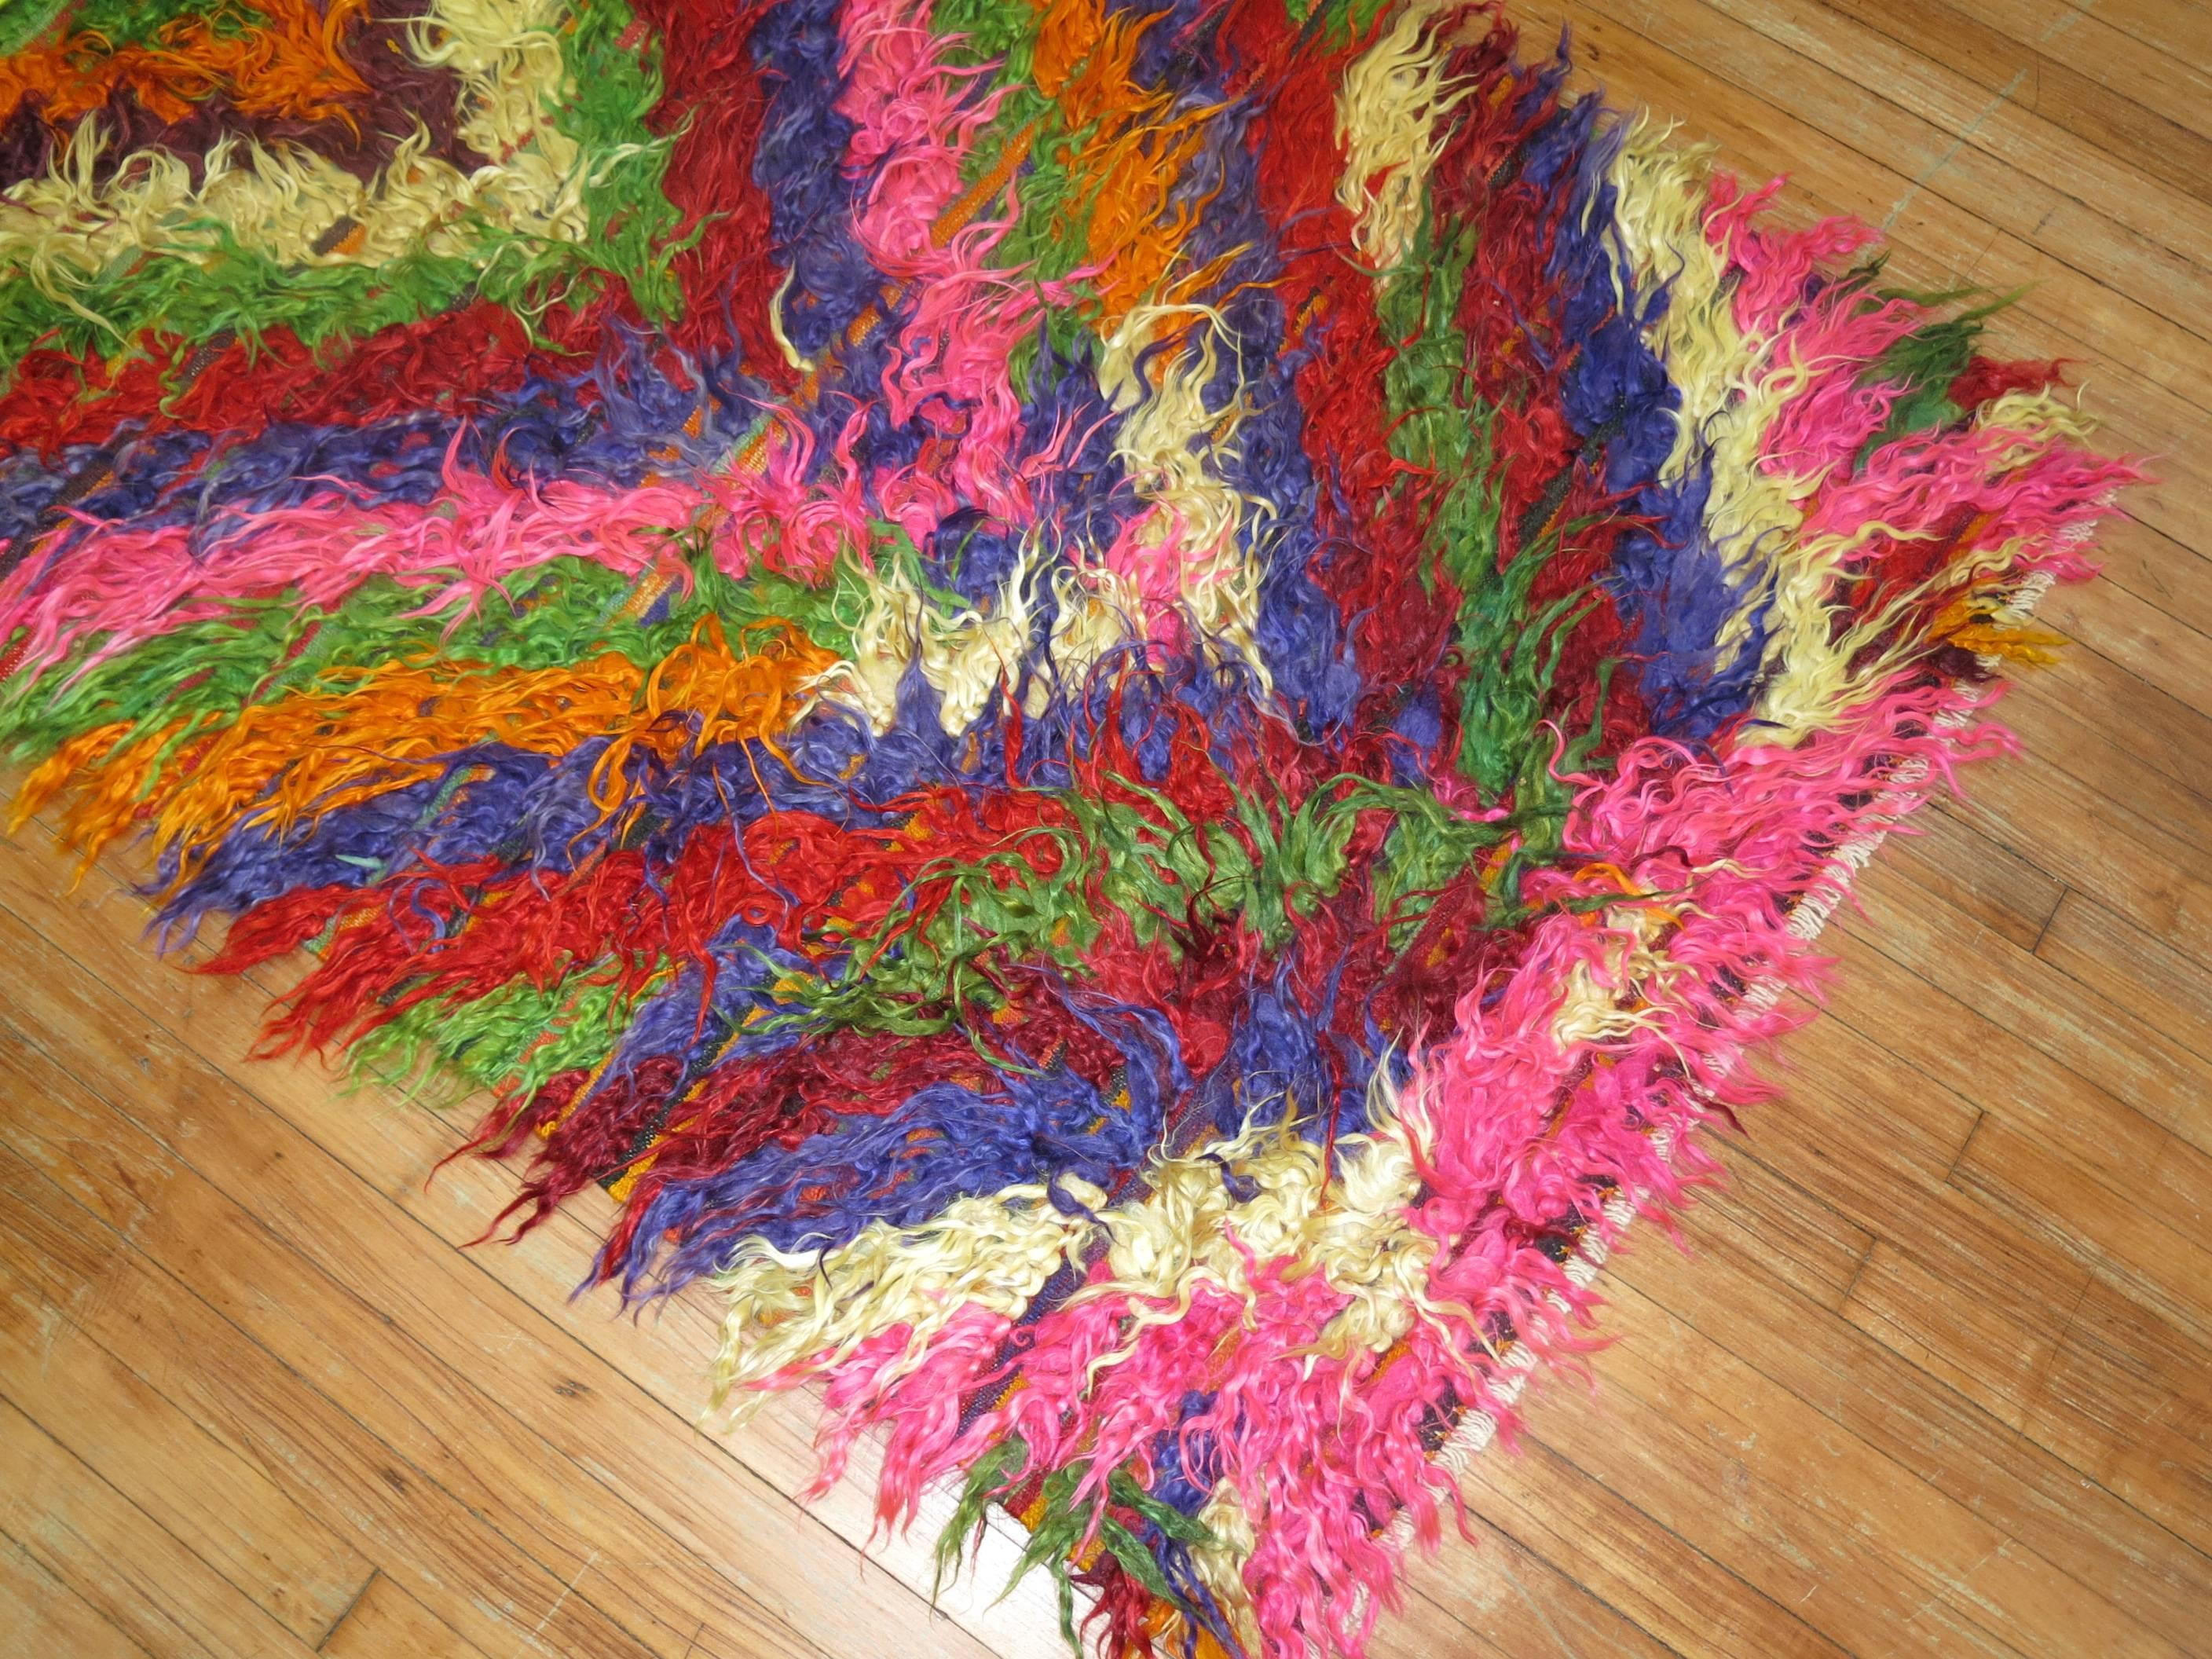 Wild colors highlight this Turkish Tulu Shag rug from the third quarter of the 20th century

Measures: 3'7